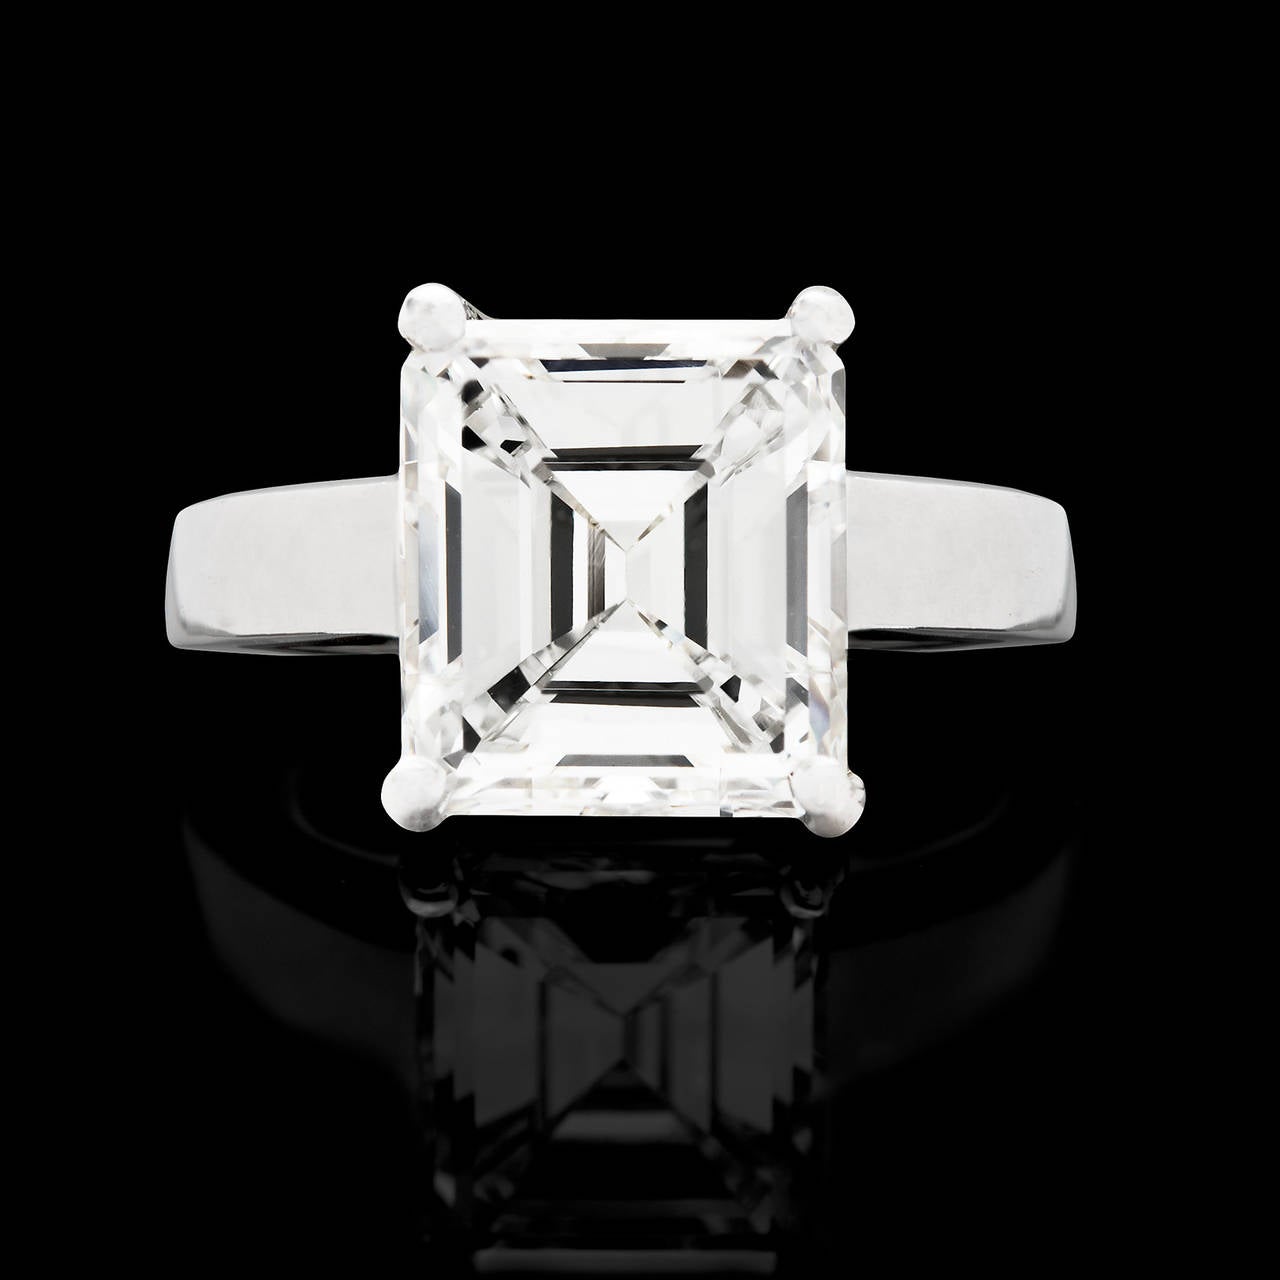 Solitaire Diamond Ring Features a Stunning 2.76 Carat Emerald Cut Diamond in a Platinum Setting. The stone is H color and VS1 clarity and measures 8.57 x 7.71 x 4.96mm. The ring is a size 4.5 and weighs 7.7 grams. GIA Report 6167488330 is included.